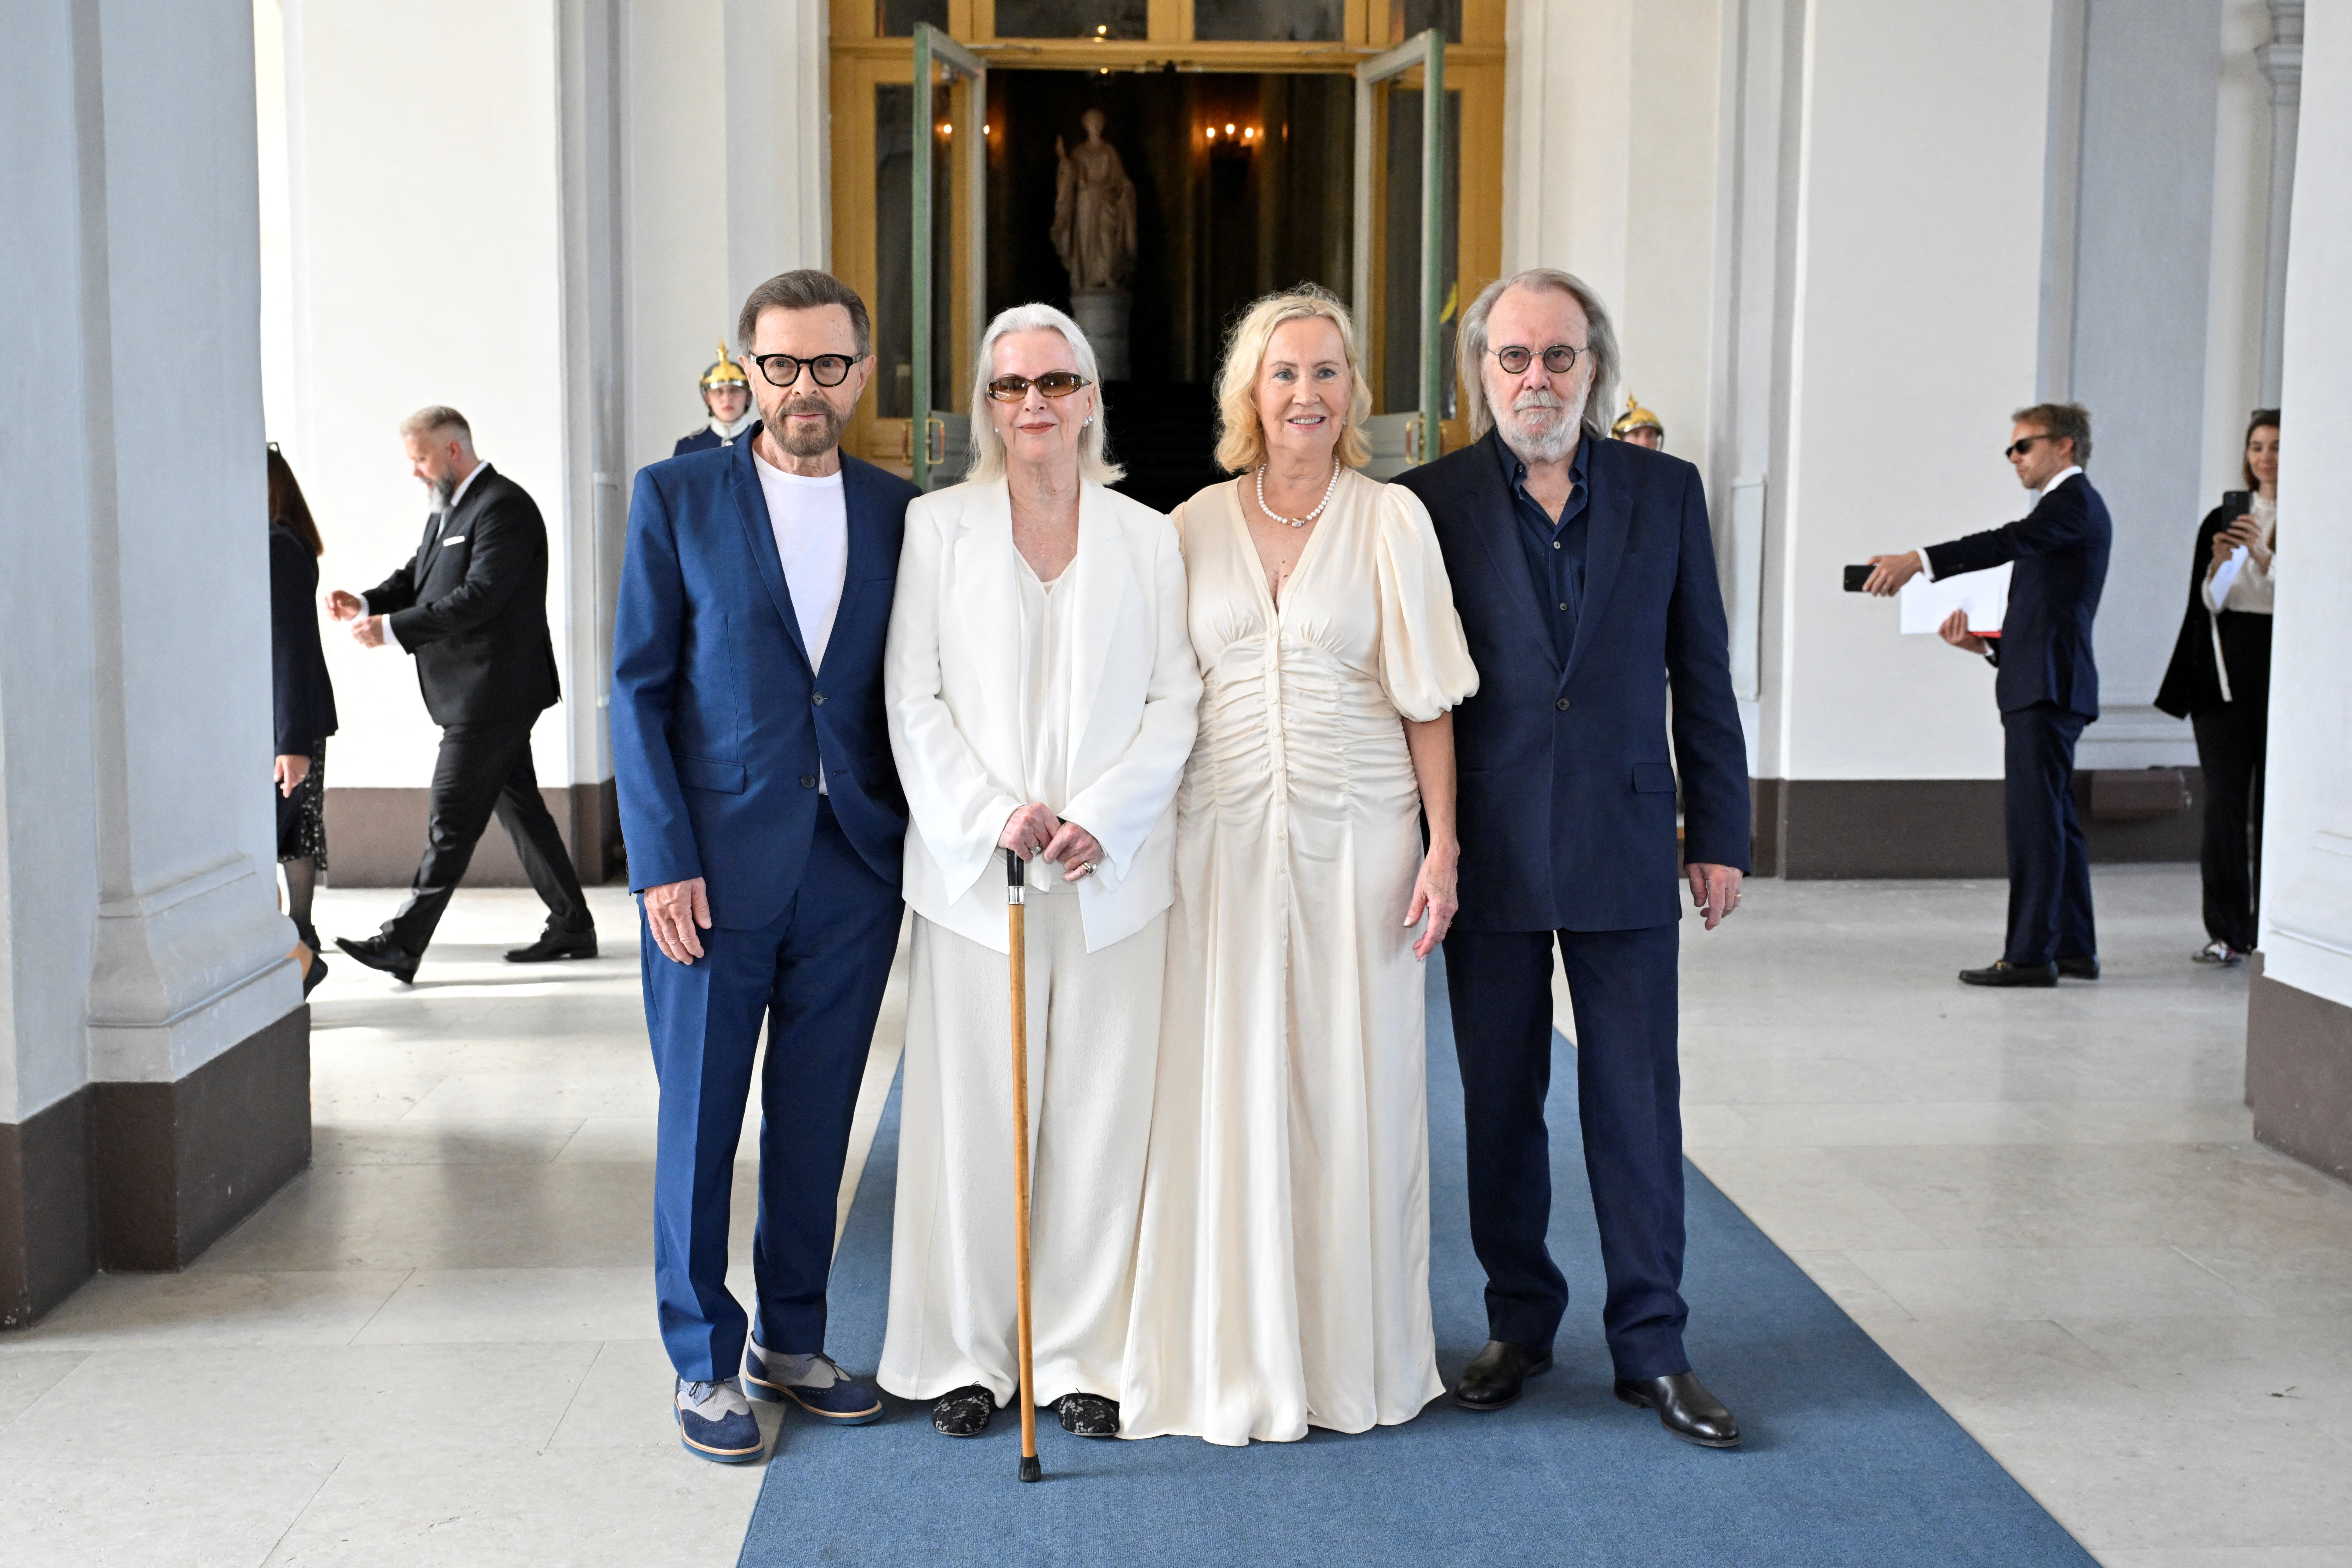 The members of the music group ABBA receive the Royal Vasa Order from Sweden's King Carl Gustaf and Queen Silvia in Stockholm